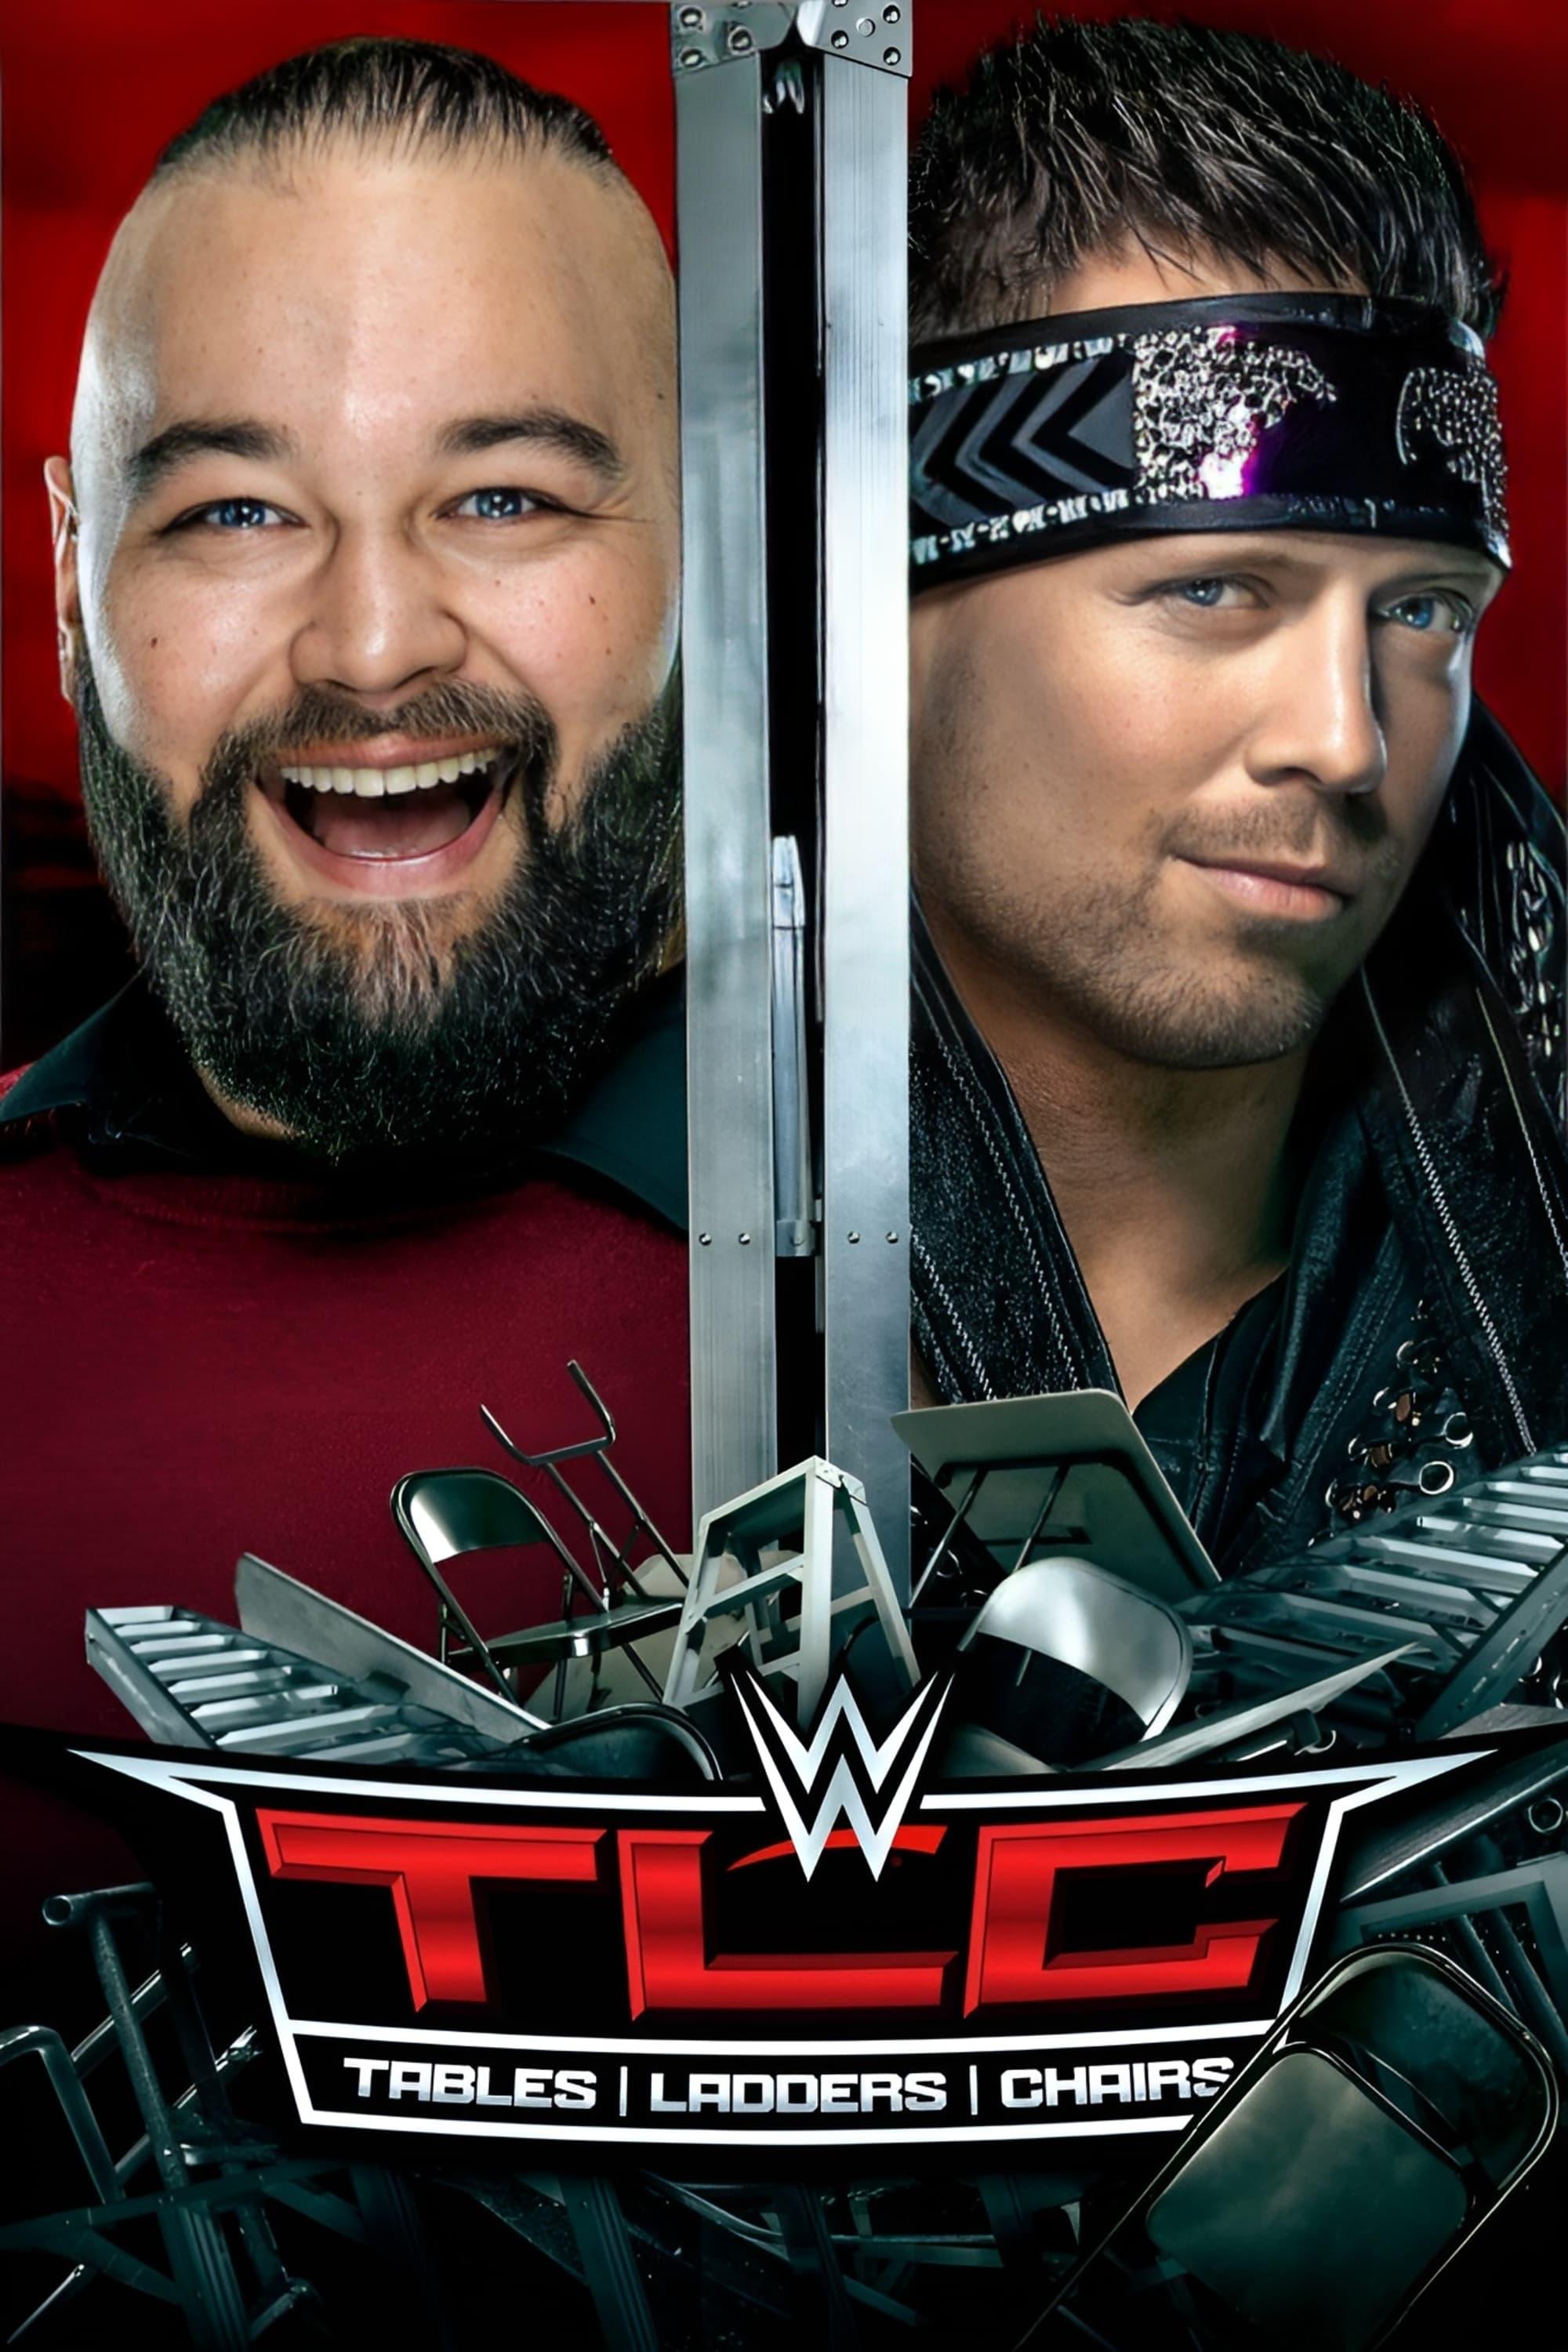 WWE TLC: Tables, Ladders & Chairs 2019 poster